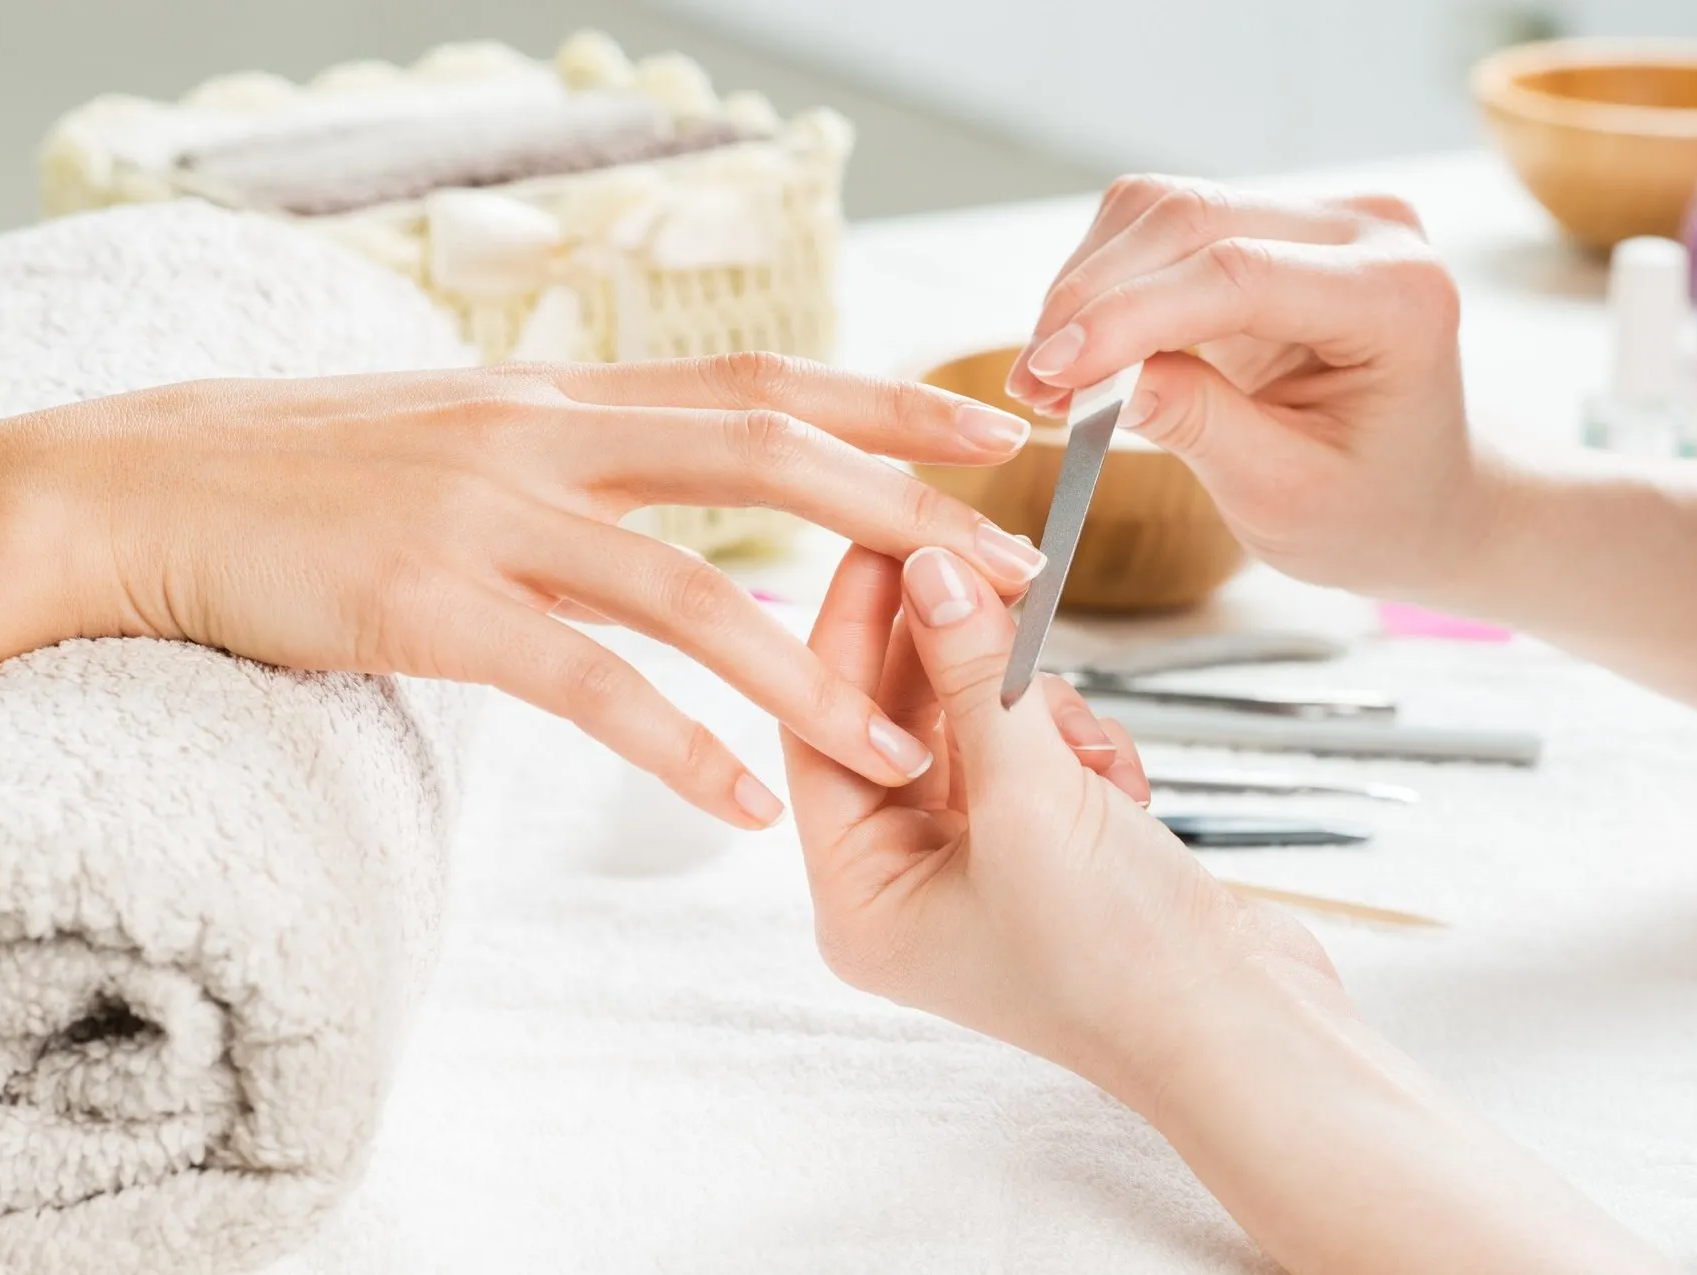 Mobile manicure and pedicures, at home therapist in Wirral and Chester, Mobile Massage in Chester and Wirral, At home massage,  Massage chester, Massage wirral, Beauty chester, Beauty wirral, Back massage wirral, Back massage Chester, at home massage therapist, massage at home, massage in own hom